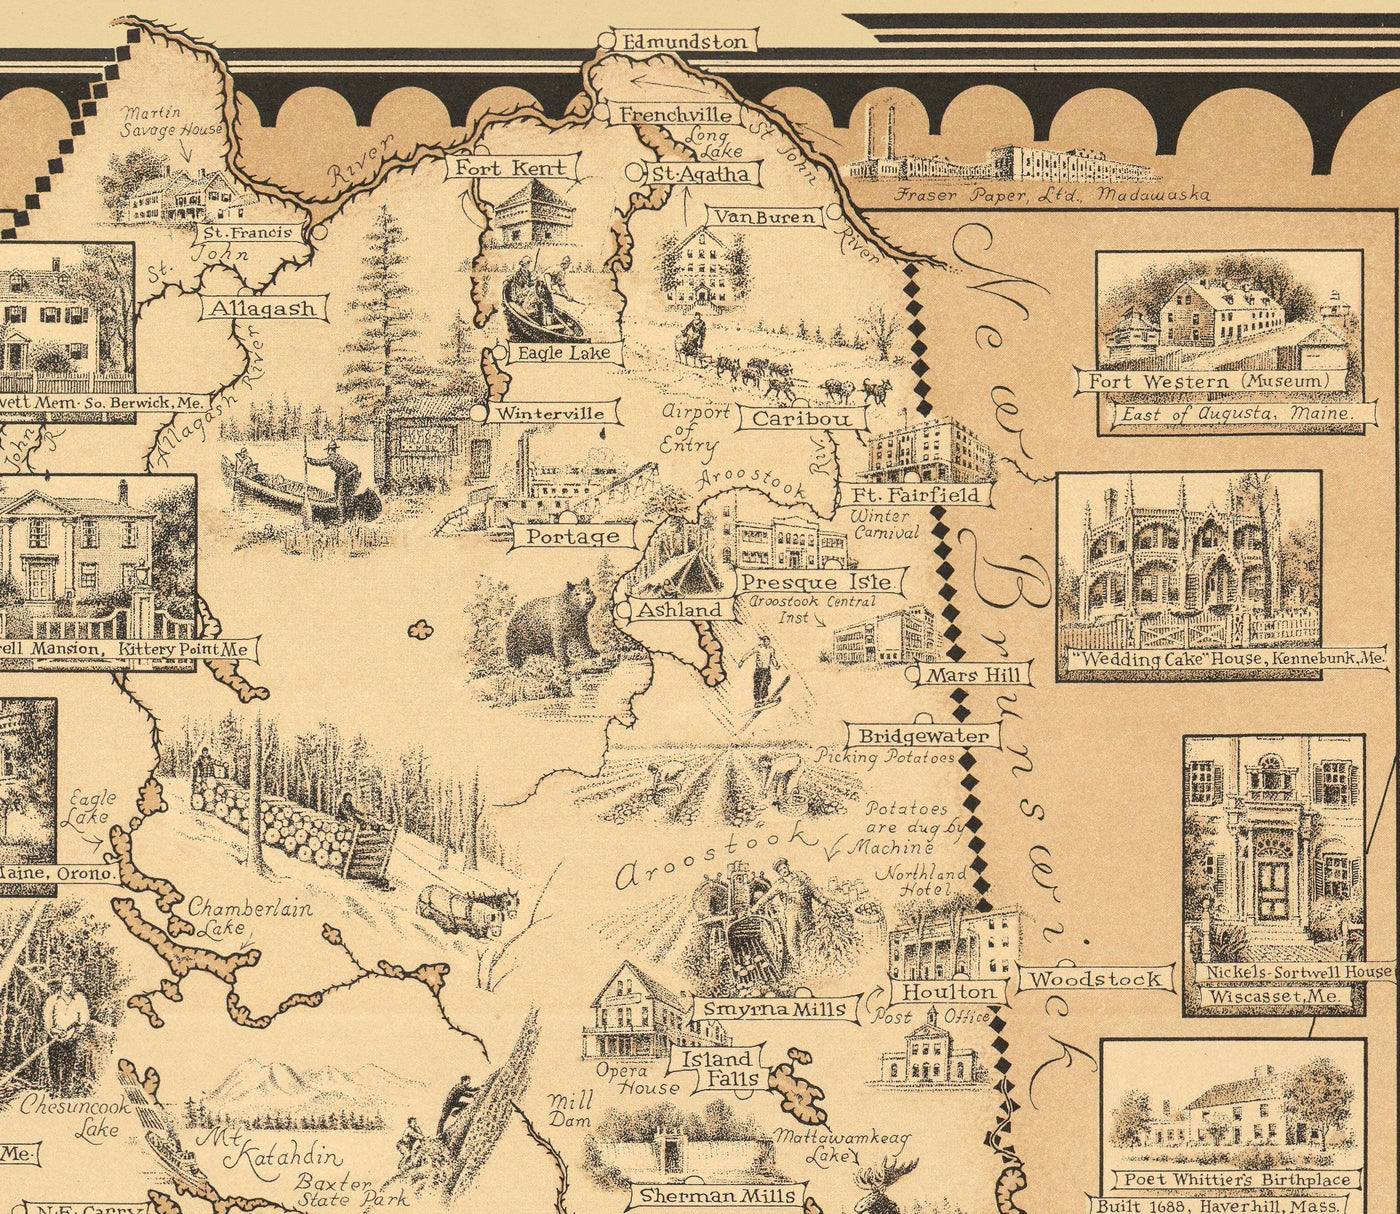 Old Pictorial Map of New England, USA, 1939 by Ernest Dudley Chase - Maine, Vermont, New Hampshire, Massachusetts, Connecticut, Rhode Island